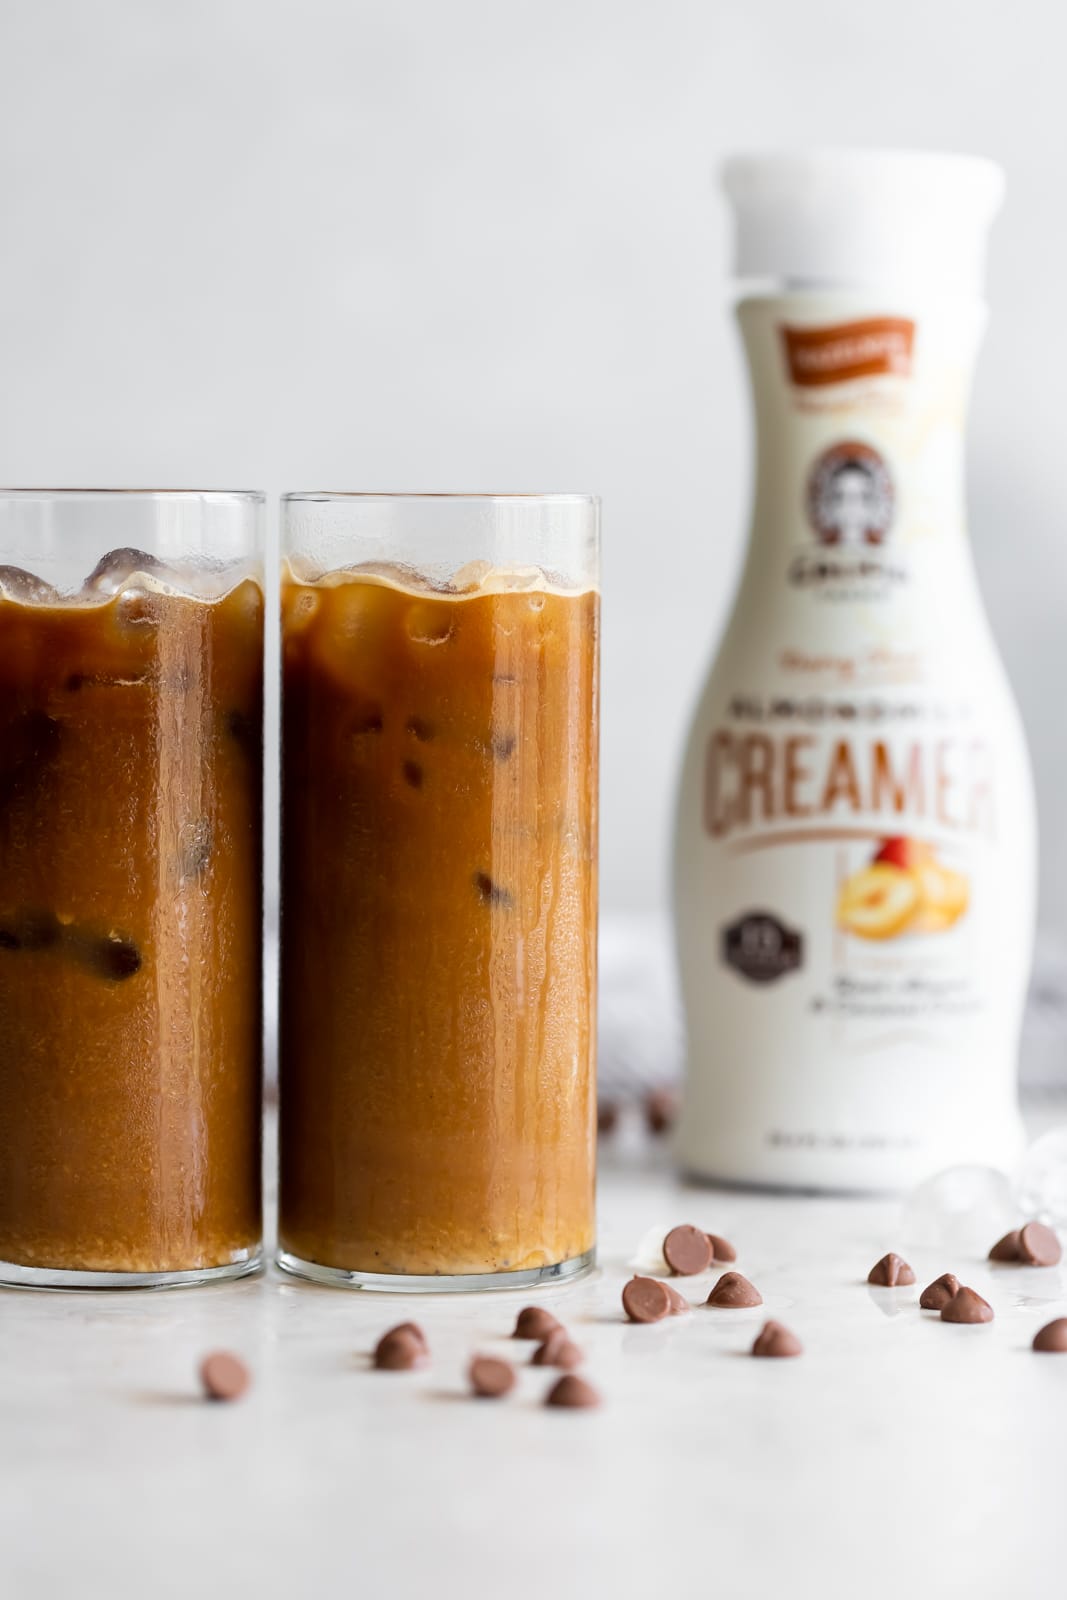 A frothy dairy-free cafe con leche (milk with coffee drink) made iced with sweetened Cuban coffee, creamer, and almond milk.